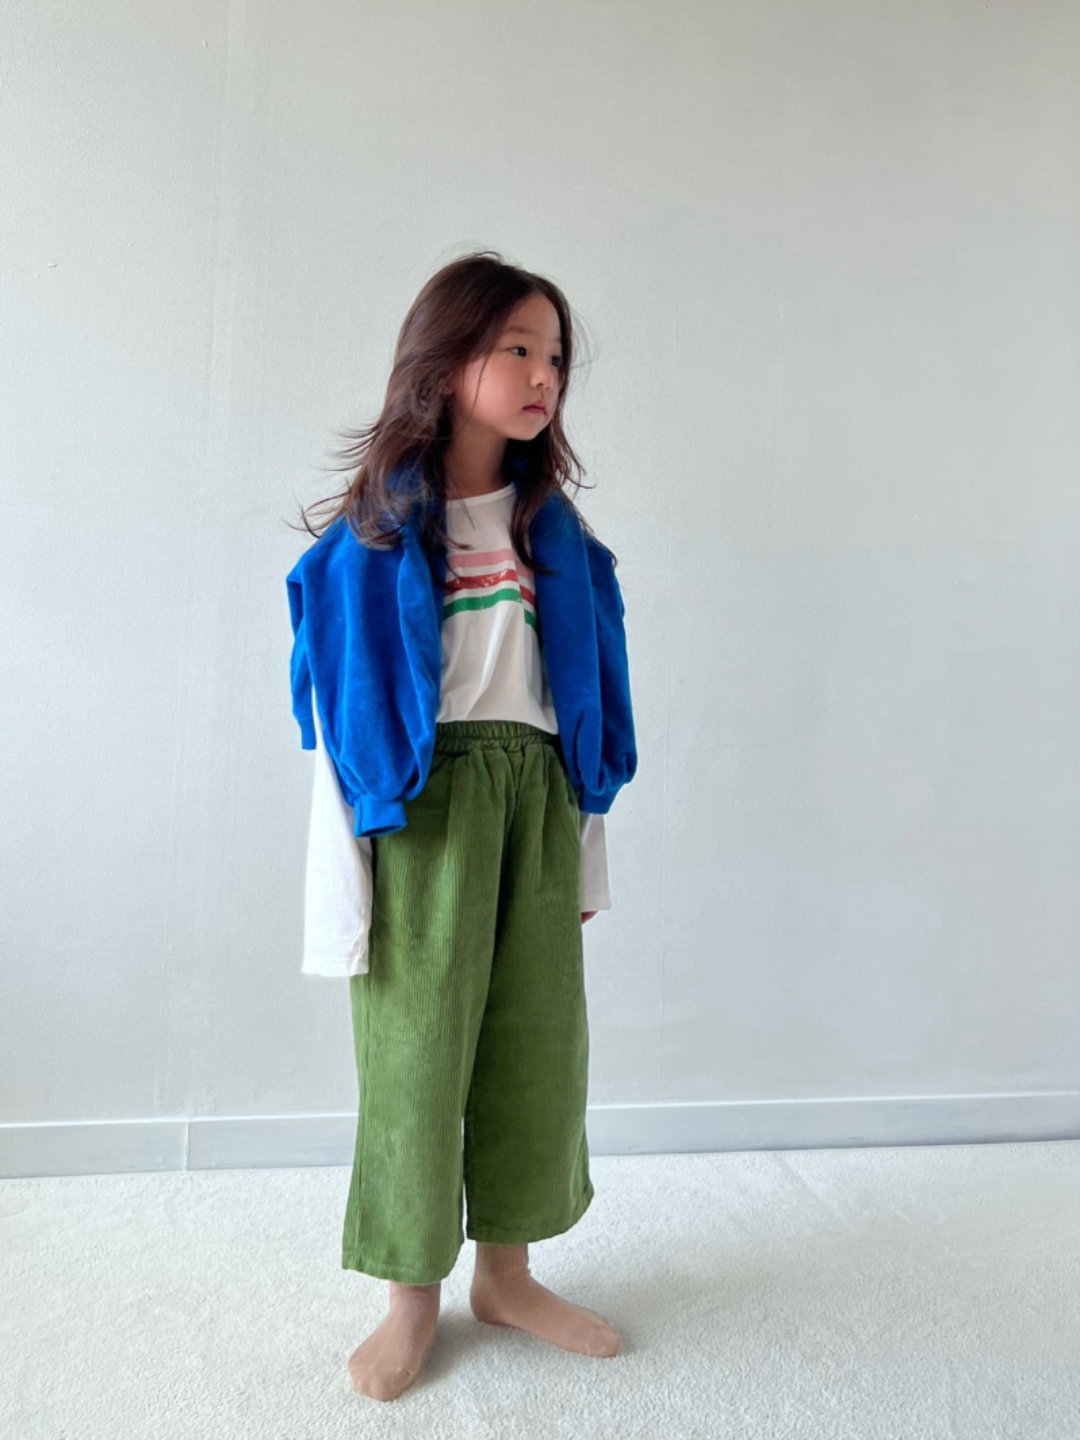 Moss | A girl wearing kids wide-leg corduroy pants in moss green, paired with a white t-shirt with three stripes in pink, red and green. A royal blue sweater is draped over her shoulders, and she is standing on grey carpet with a white wall behind her.